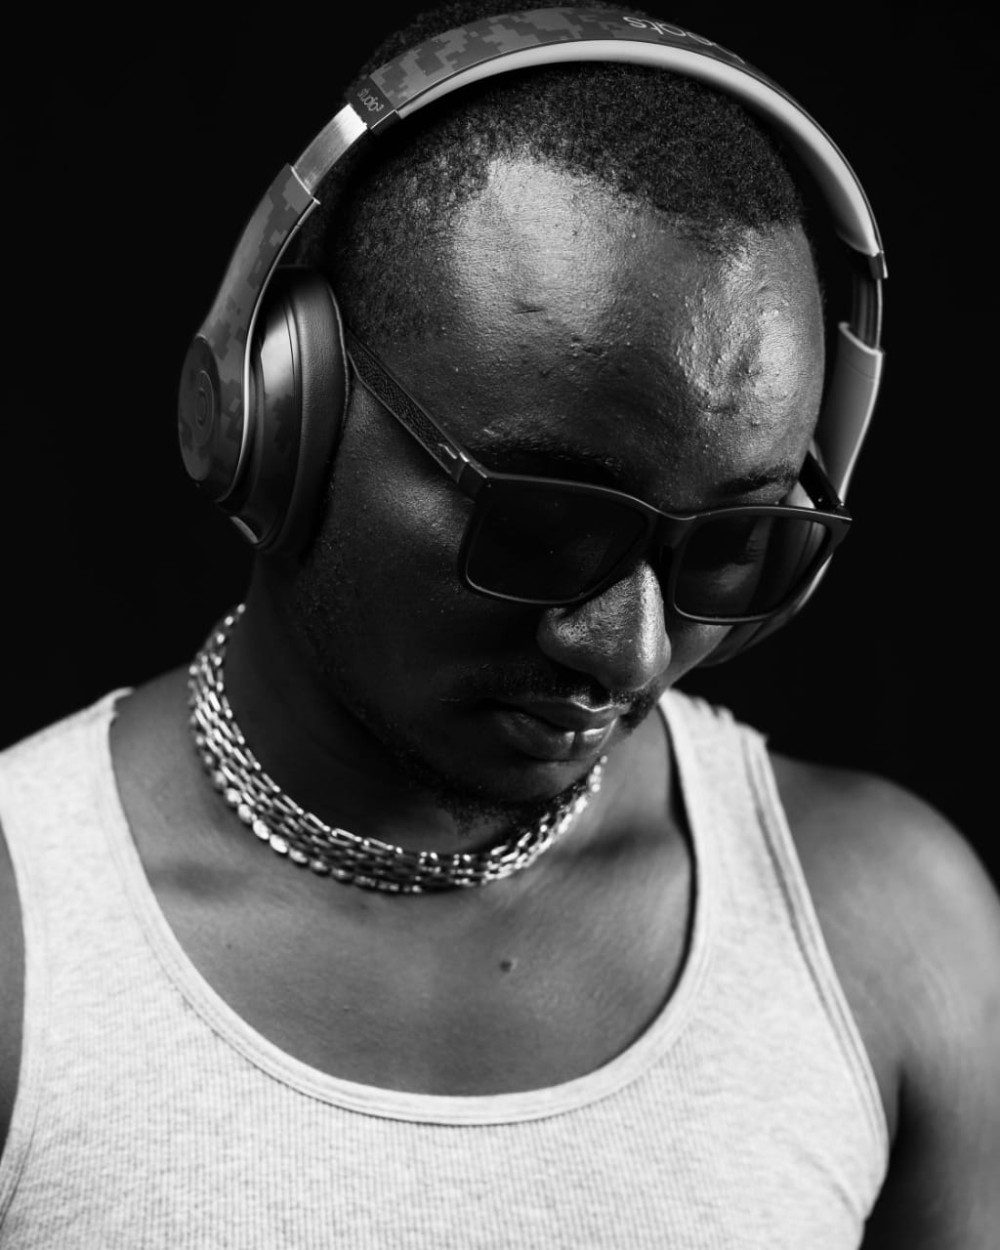 DJ Justice GH Shares Tempestuous New Single ‘Burning Desire’ Featuring Offei.